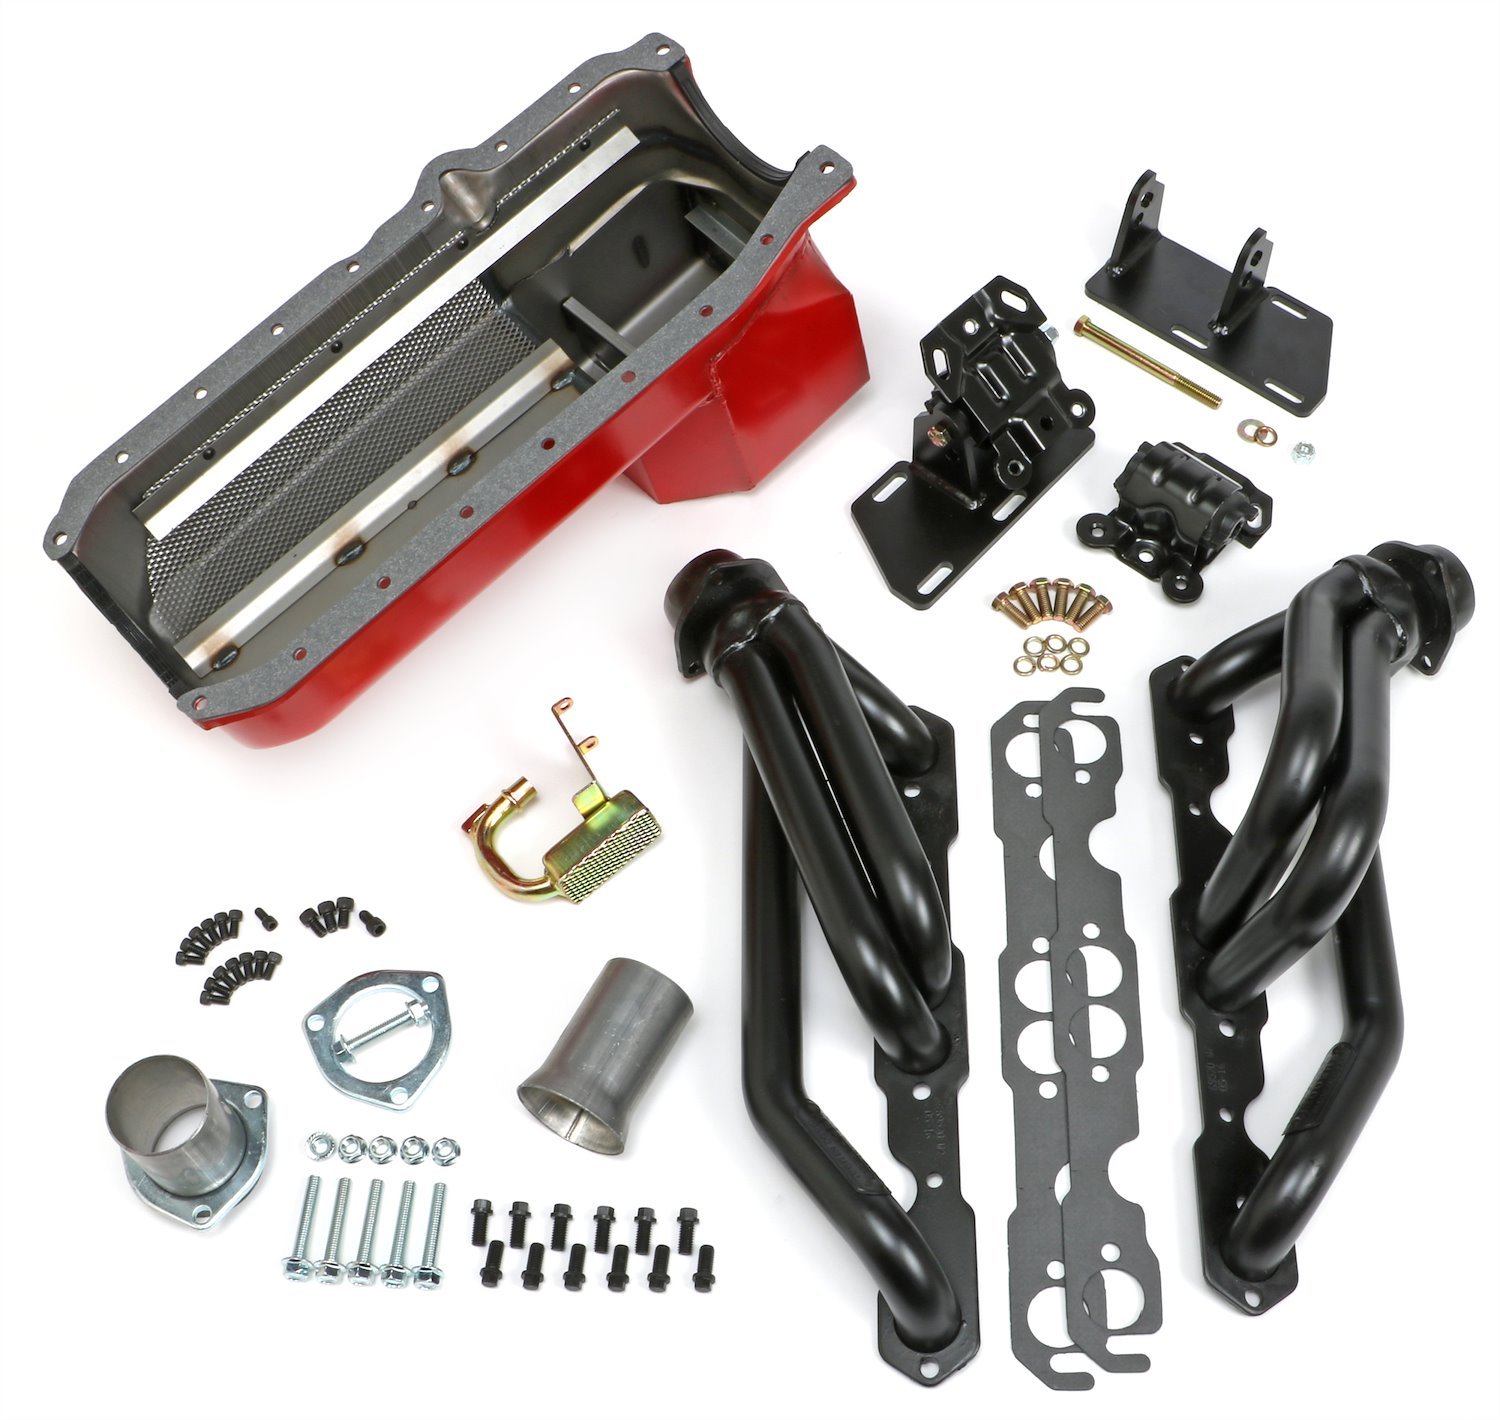 99071 Engine Swap-In-A-Box Kit for 1986-2000 Small Block Chevy w/ Factory Heads, 1982-2004 GM S10/S15/Blazer 2WD